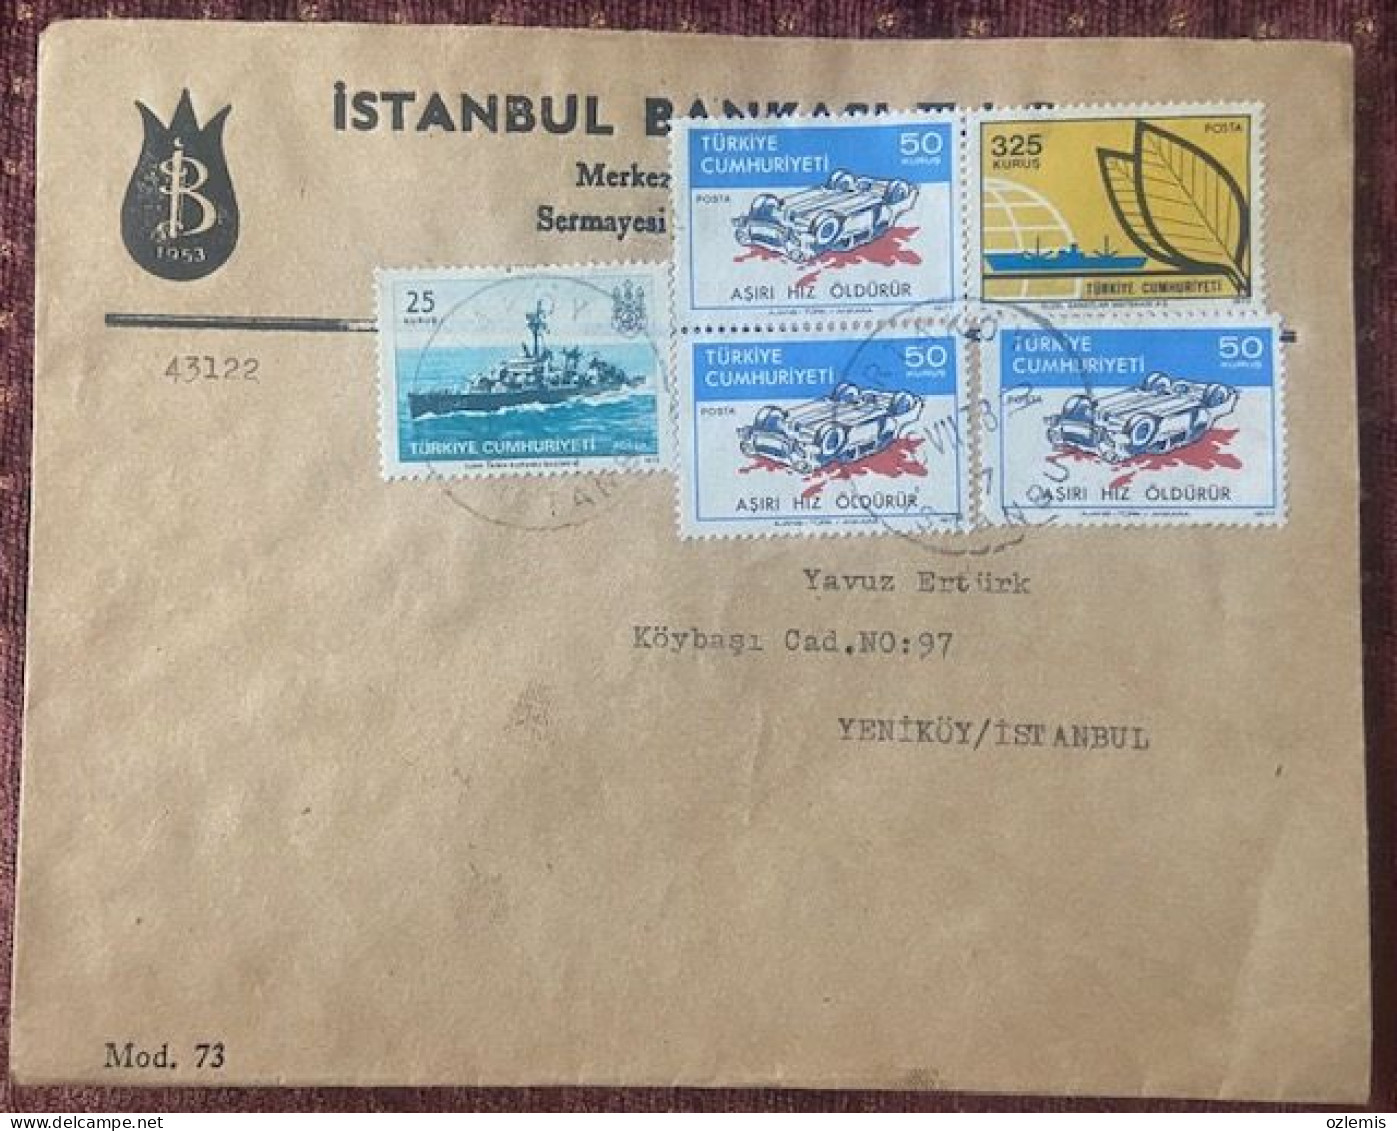 TURKEY,TURKEI,TURQUIE , ISTANBUL, TO YENIKOY ,1978  ,COVER - Covers & Documents